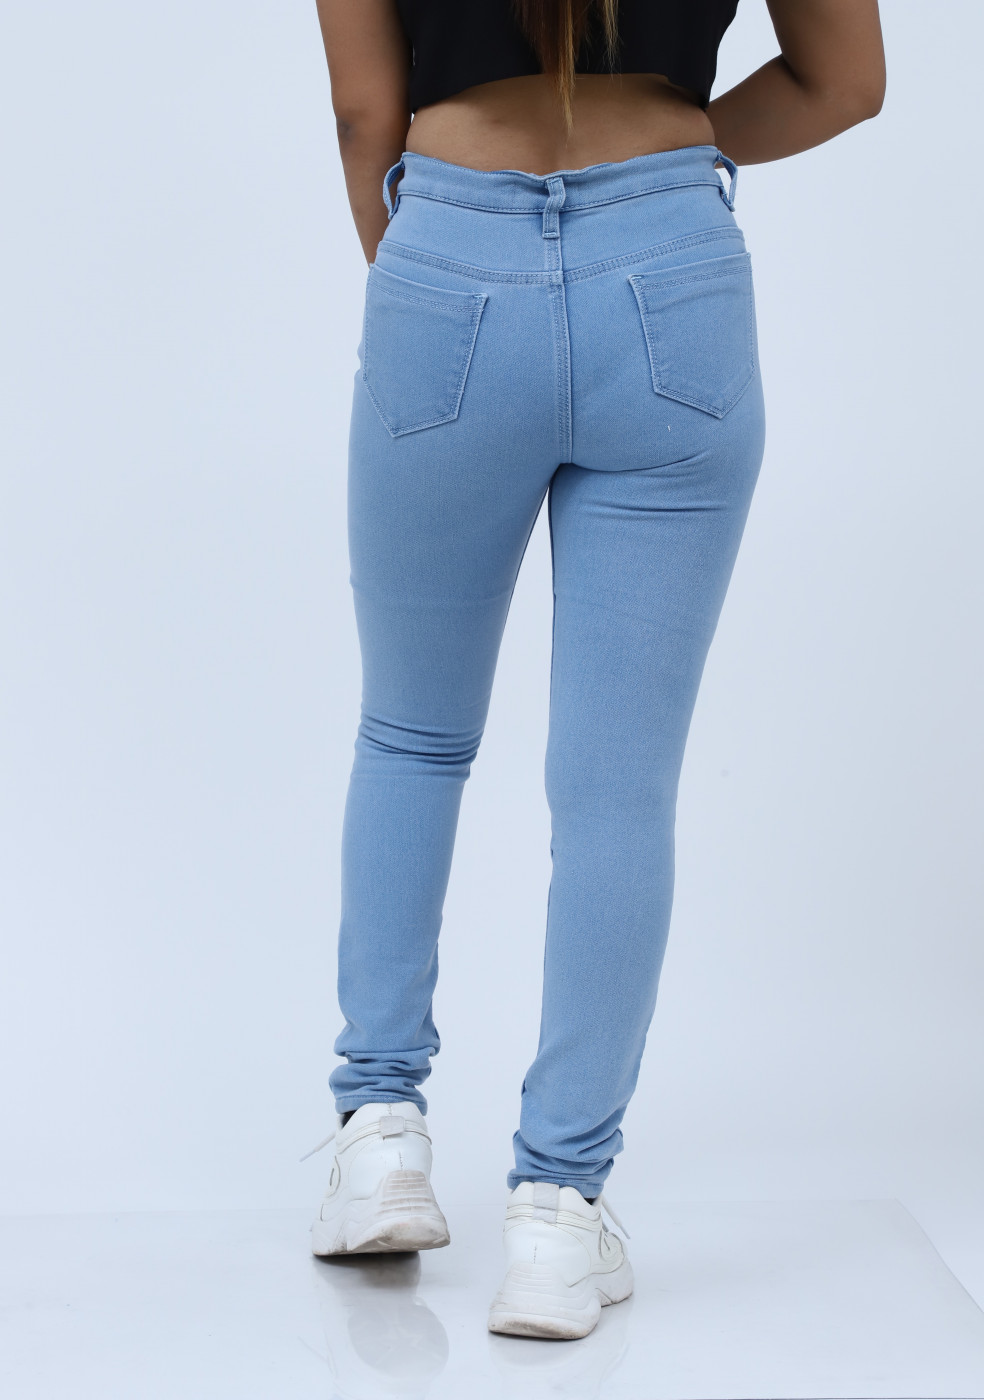 Women Stretchable Cotton ICE Jeans